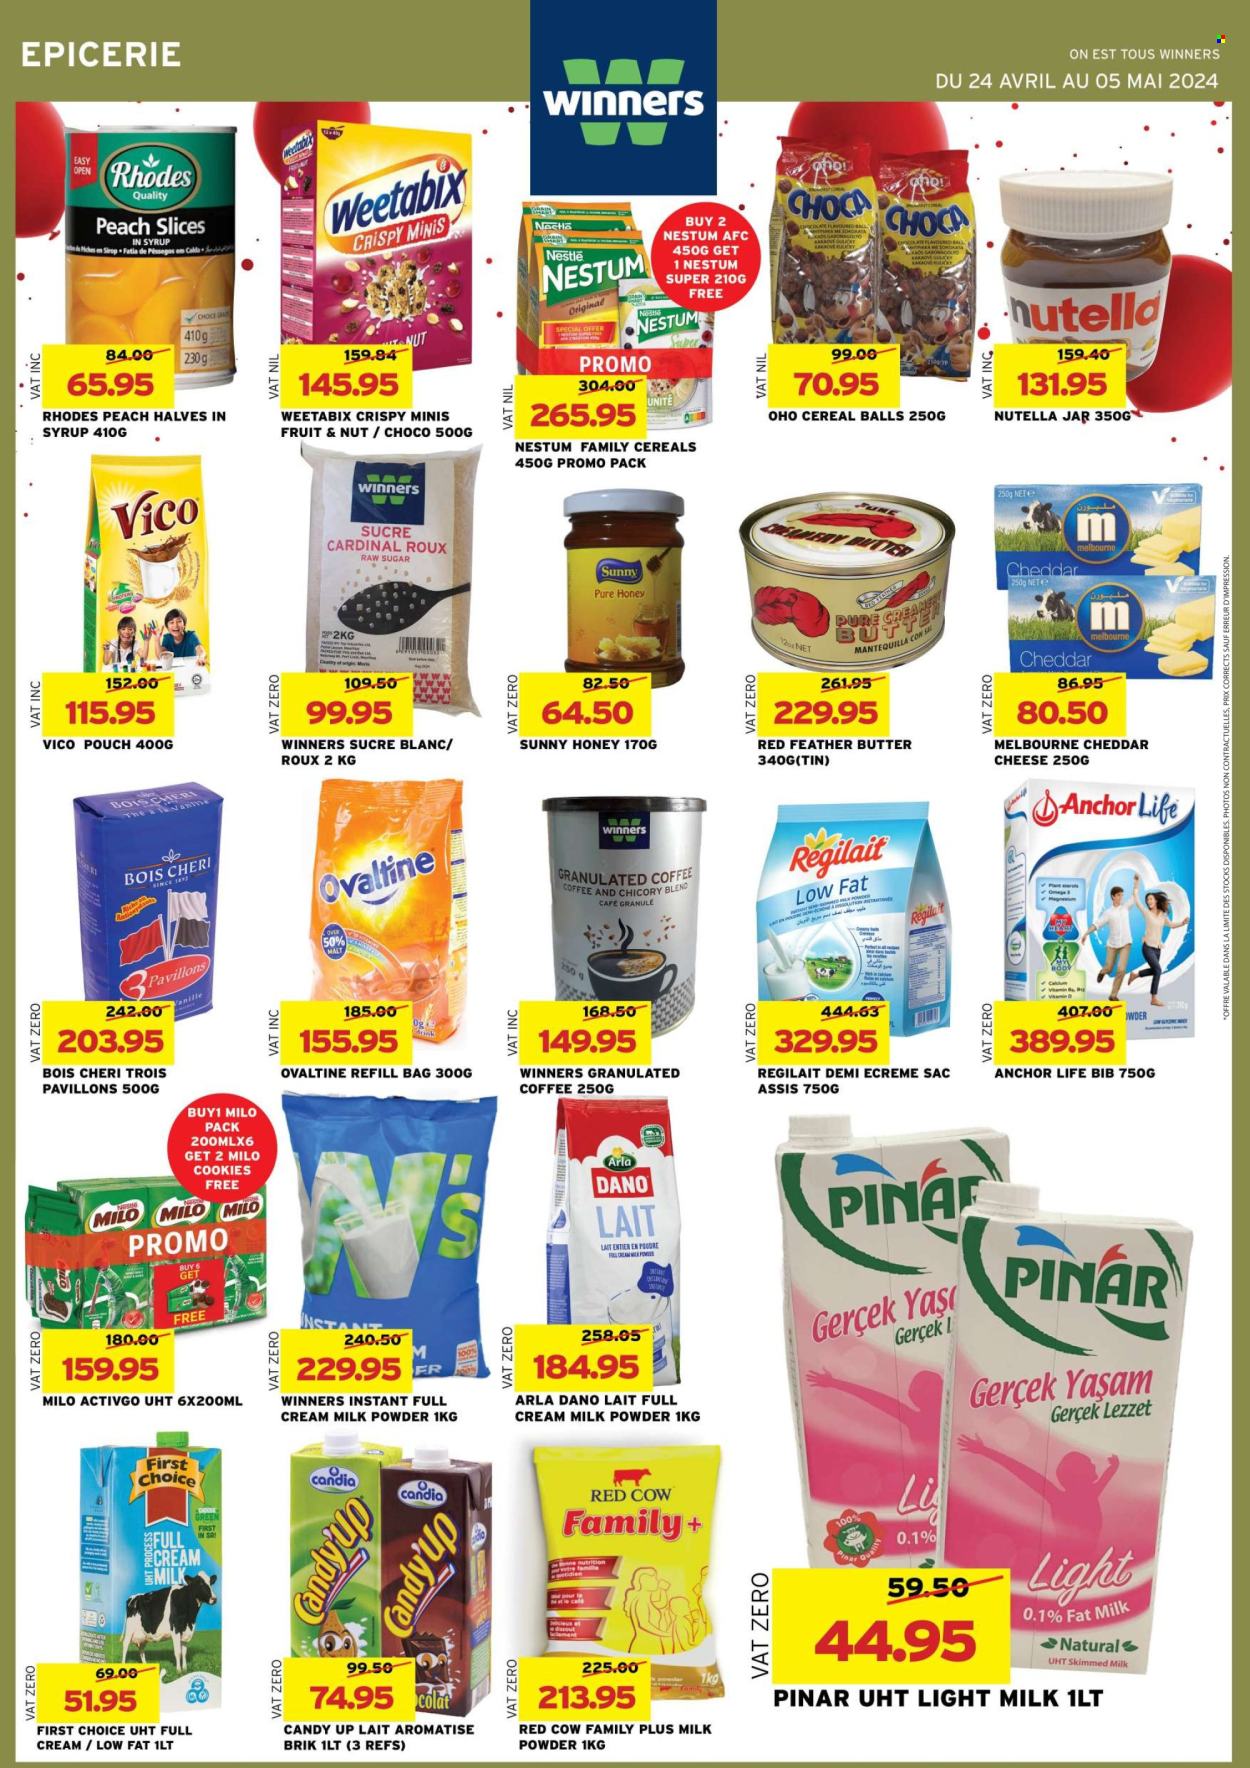 thumbnail - Winner's Catalogue - 24.04.2024 - 5.05.2024 - Sales products - Anchor, cheddar, cheese, Arla, Milo, milk powder, butter, cookies, fruit slices, Candy, malt, cereals, Weetabix, honey, hazelnut spread, coffee, Raw Sugar, jar, magnesium, Omega-3, dietary supplement, Nestlé, Nutella. Page 25.